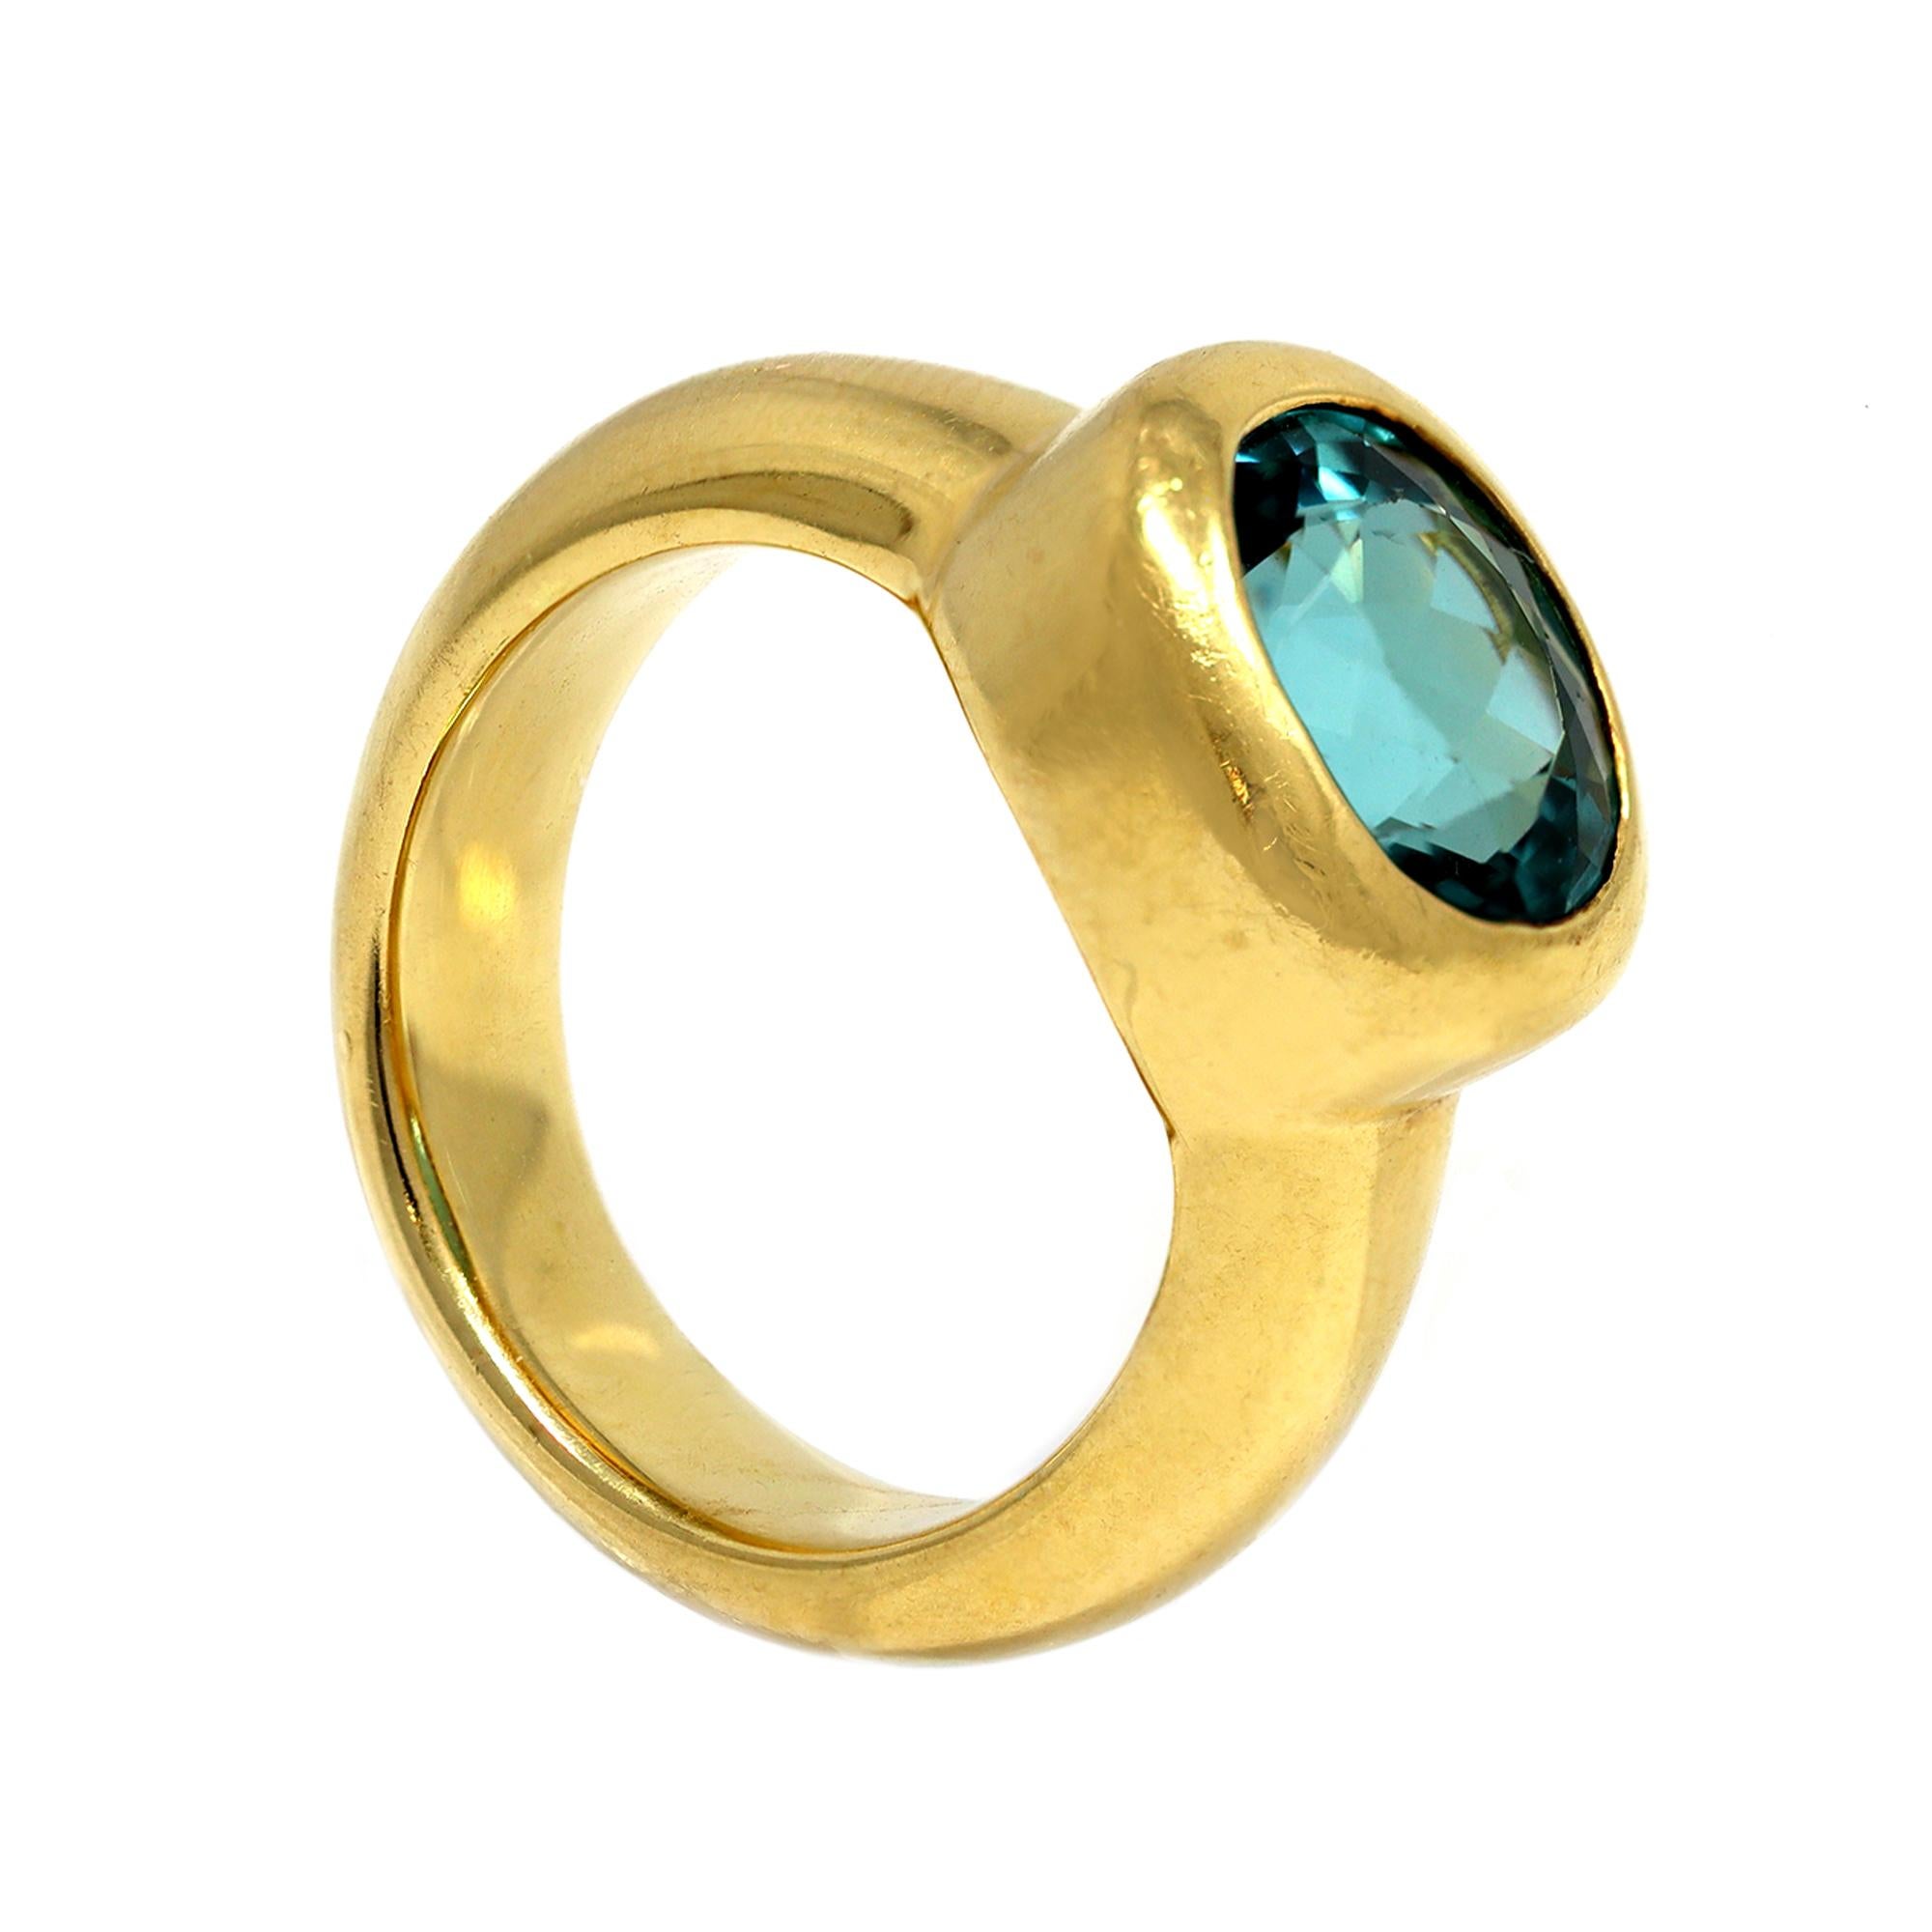 The oval faceted shape tourmaline displays a uncommon light blueish green color, with very clean crystal quality. The stone is set in a heavy bezel and larger band in 18 karat yellow gold. The hand made ring is 0.43” wide and fits a size 6 ¼. The